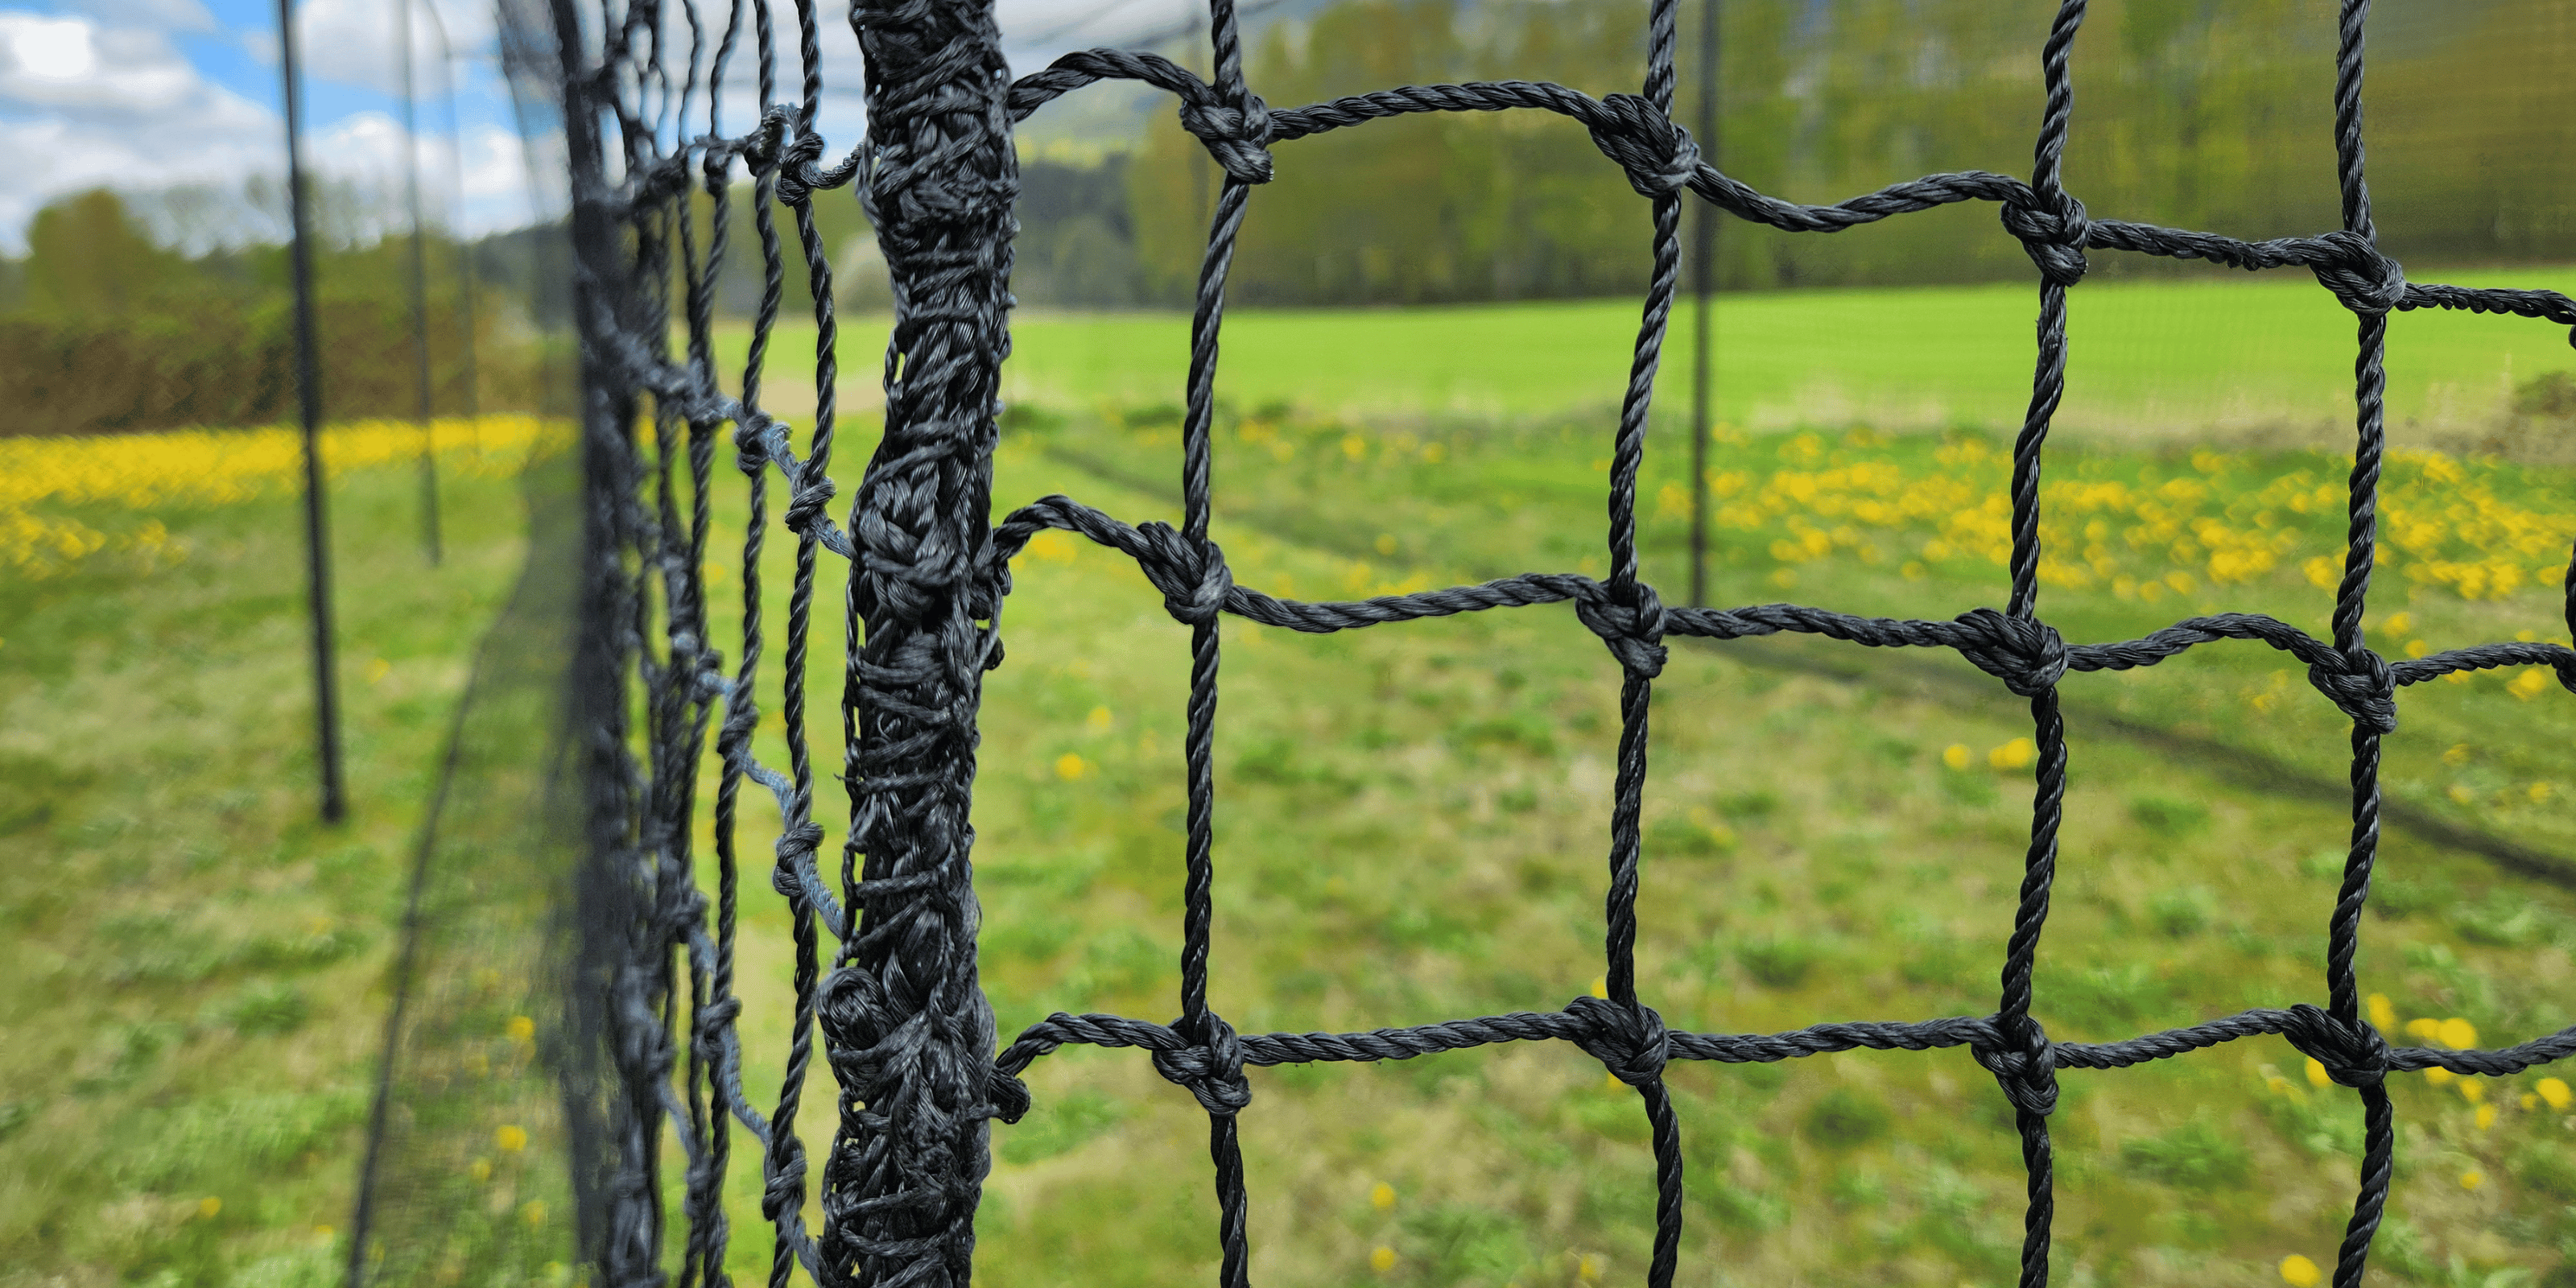 Close up view of batting cage net rope border and netting meshes